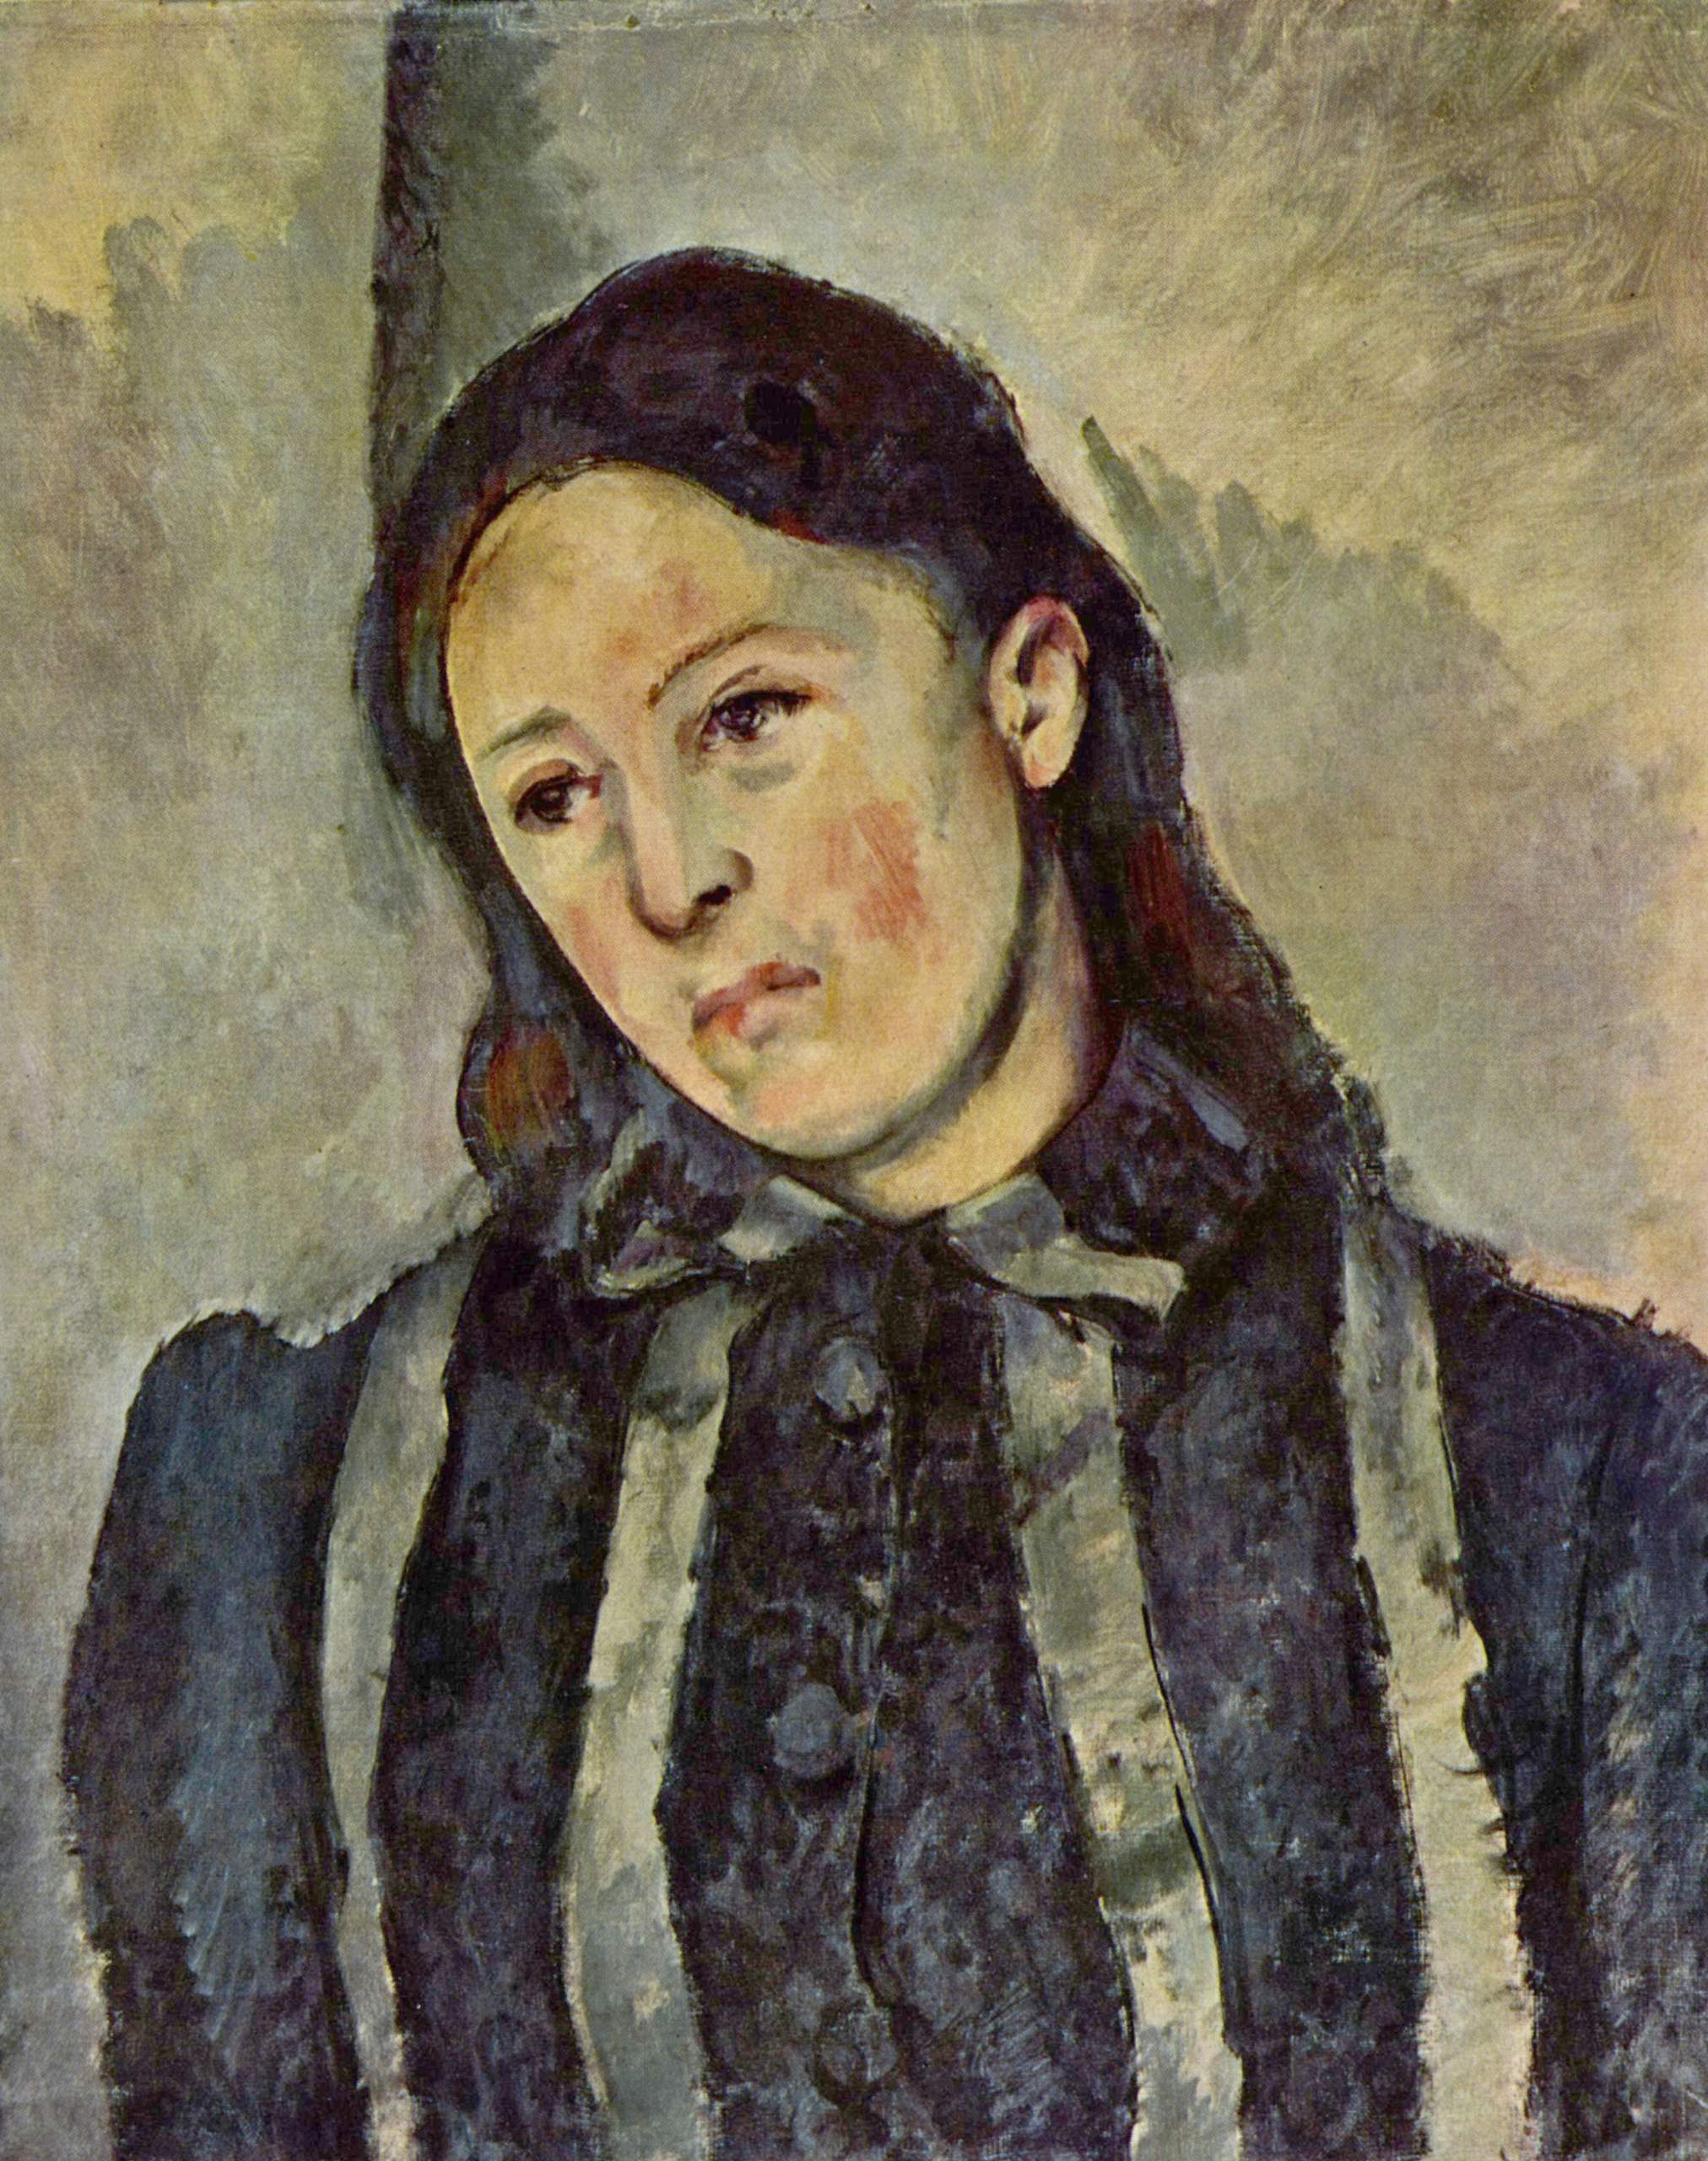 Portrait of Madame Cézanne with Loosened Hair by Paul Cézanne - 1882-1887 - 62 × 51 cm private collection